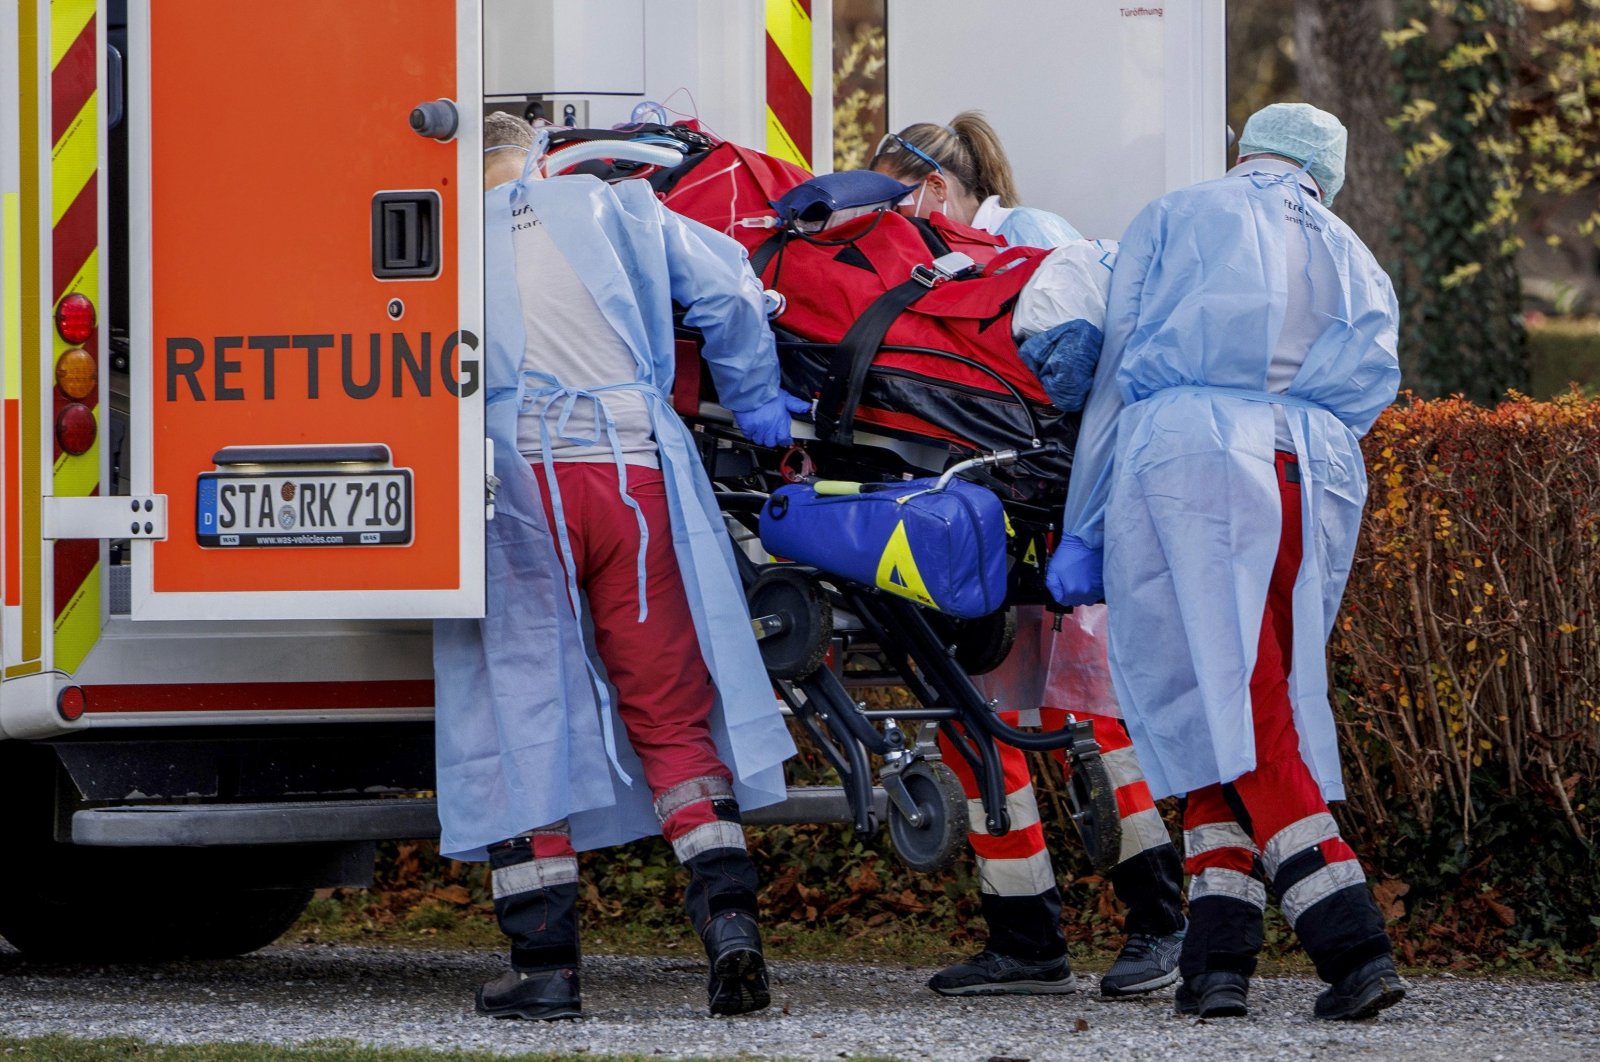 Rescue workers load a COVID-19 intensive care patient from an air rescue helicopter onto an ambulance vehicle at a sports field in Herrsching, Germany, Nov. 19, 2021. (dpa via AP)